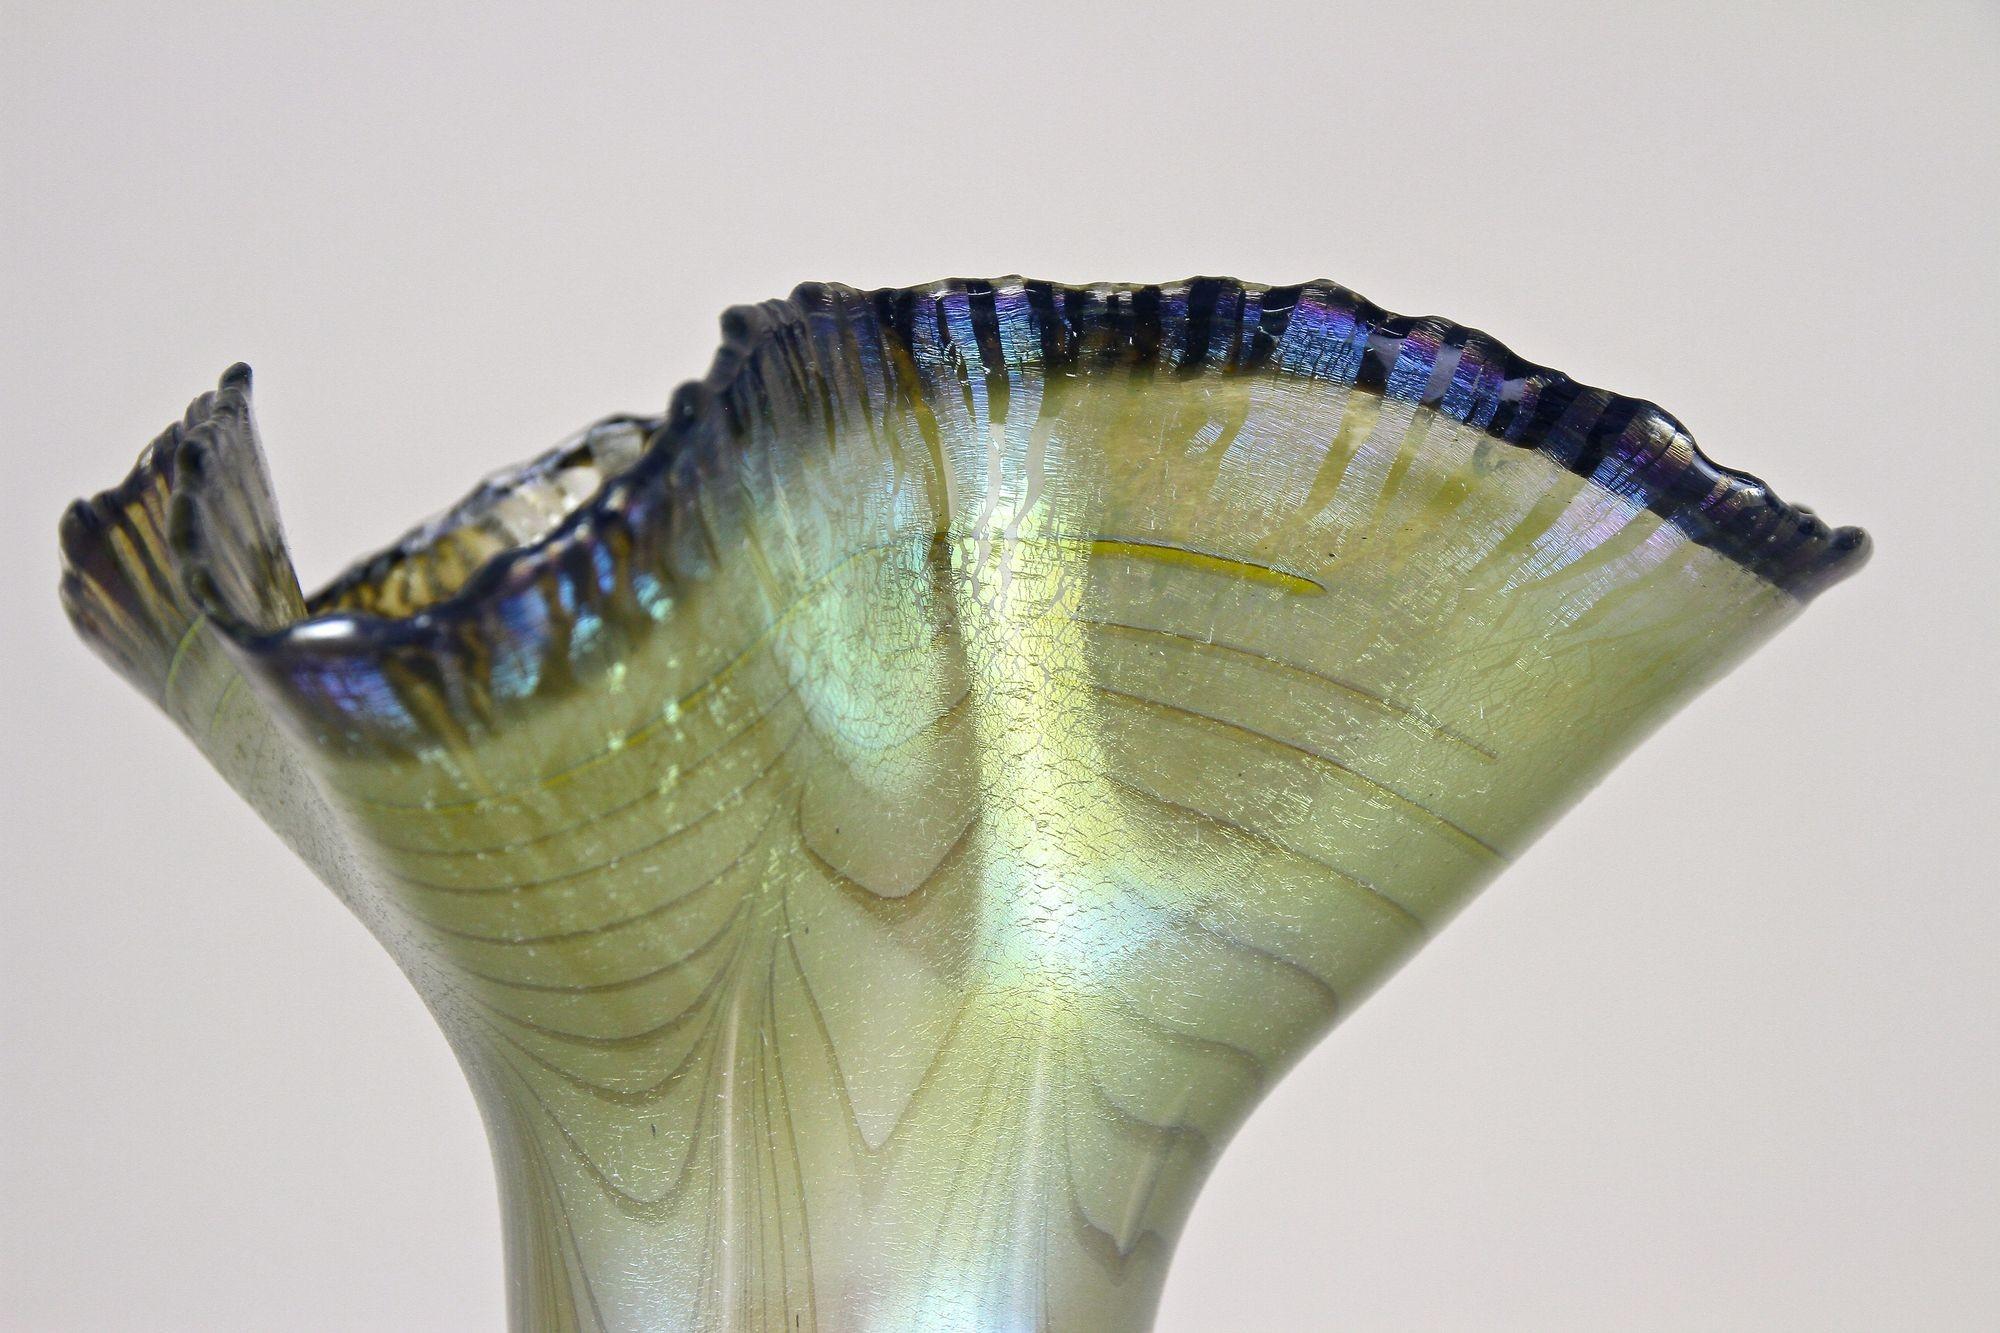 20th Century Iridescent Glass Vase by E. Eisch - Signed, Germany 1982 For Sale 8